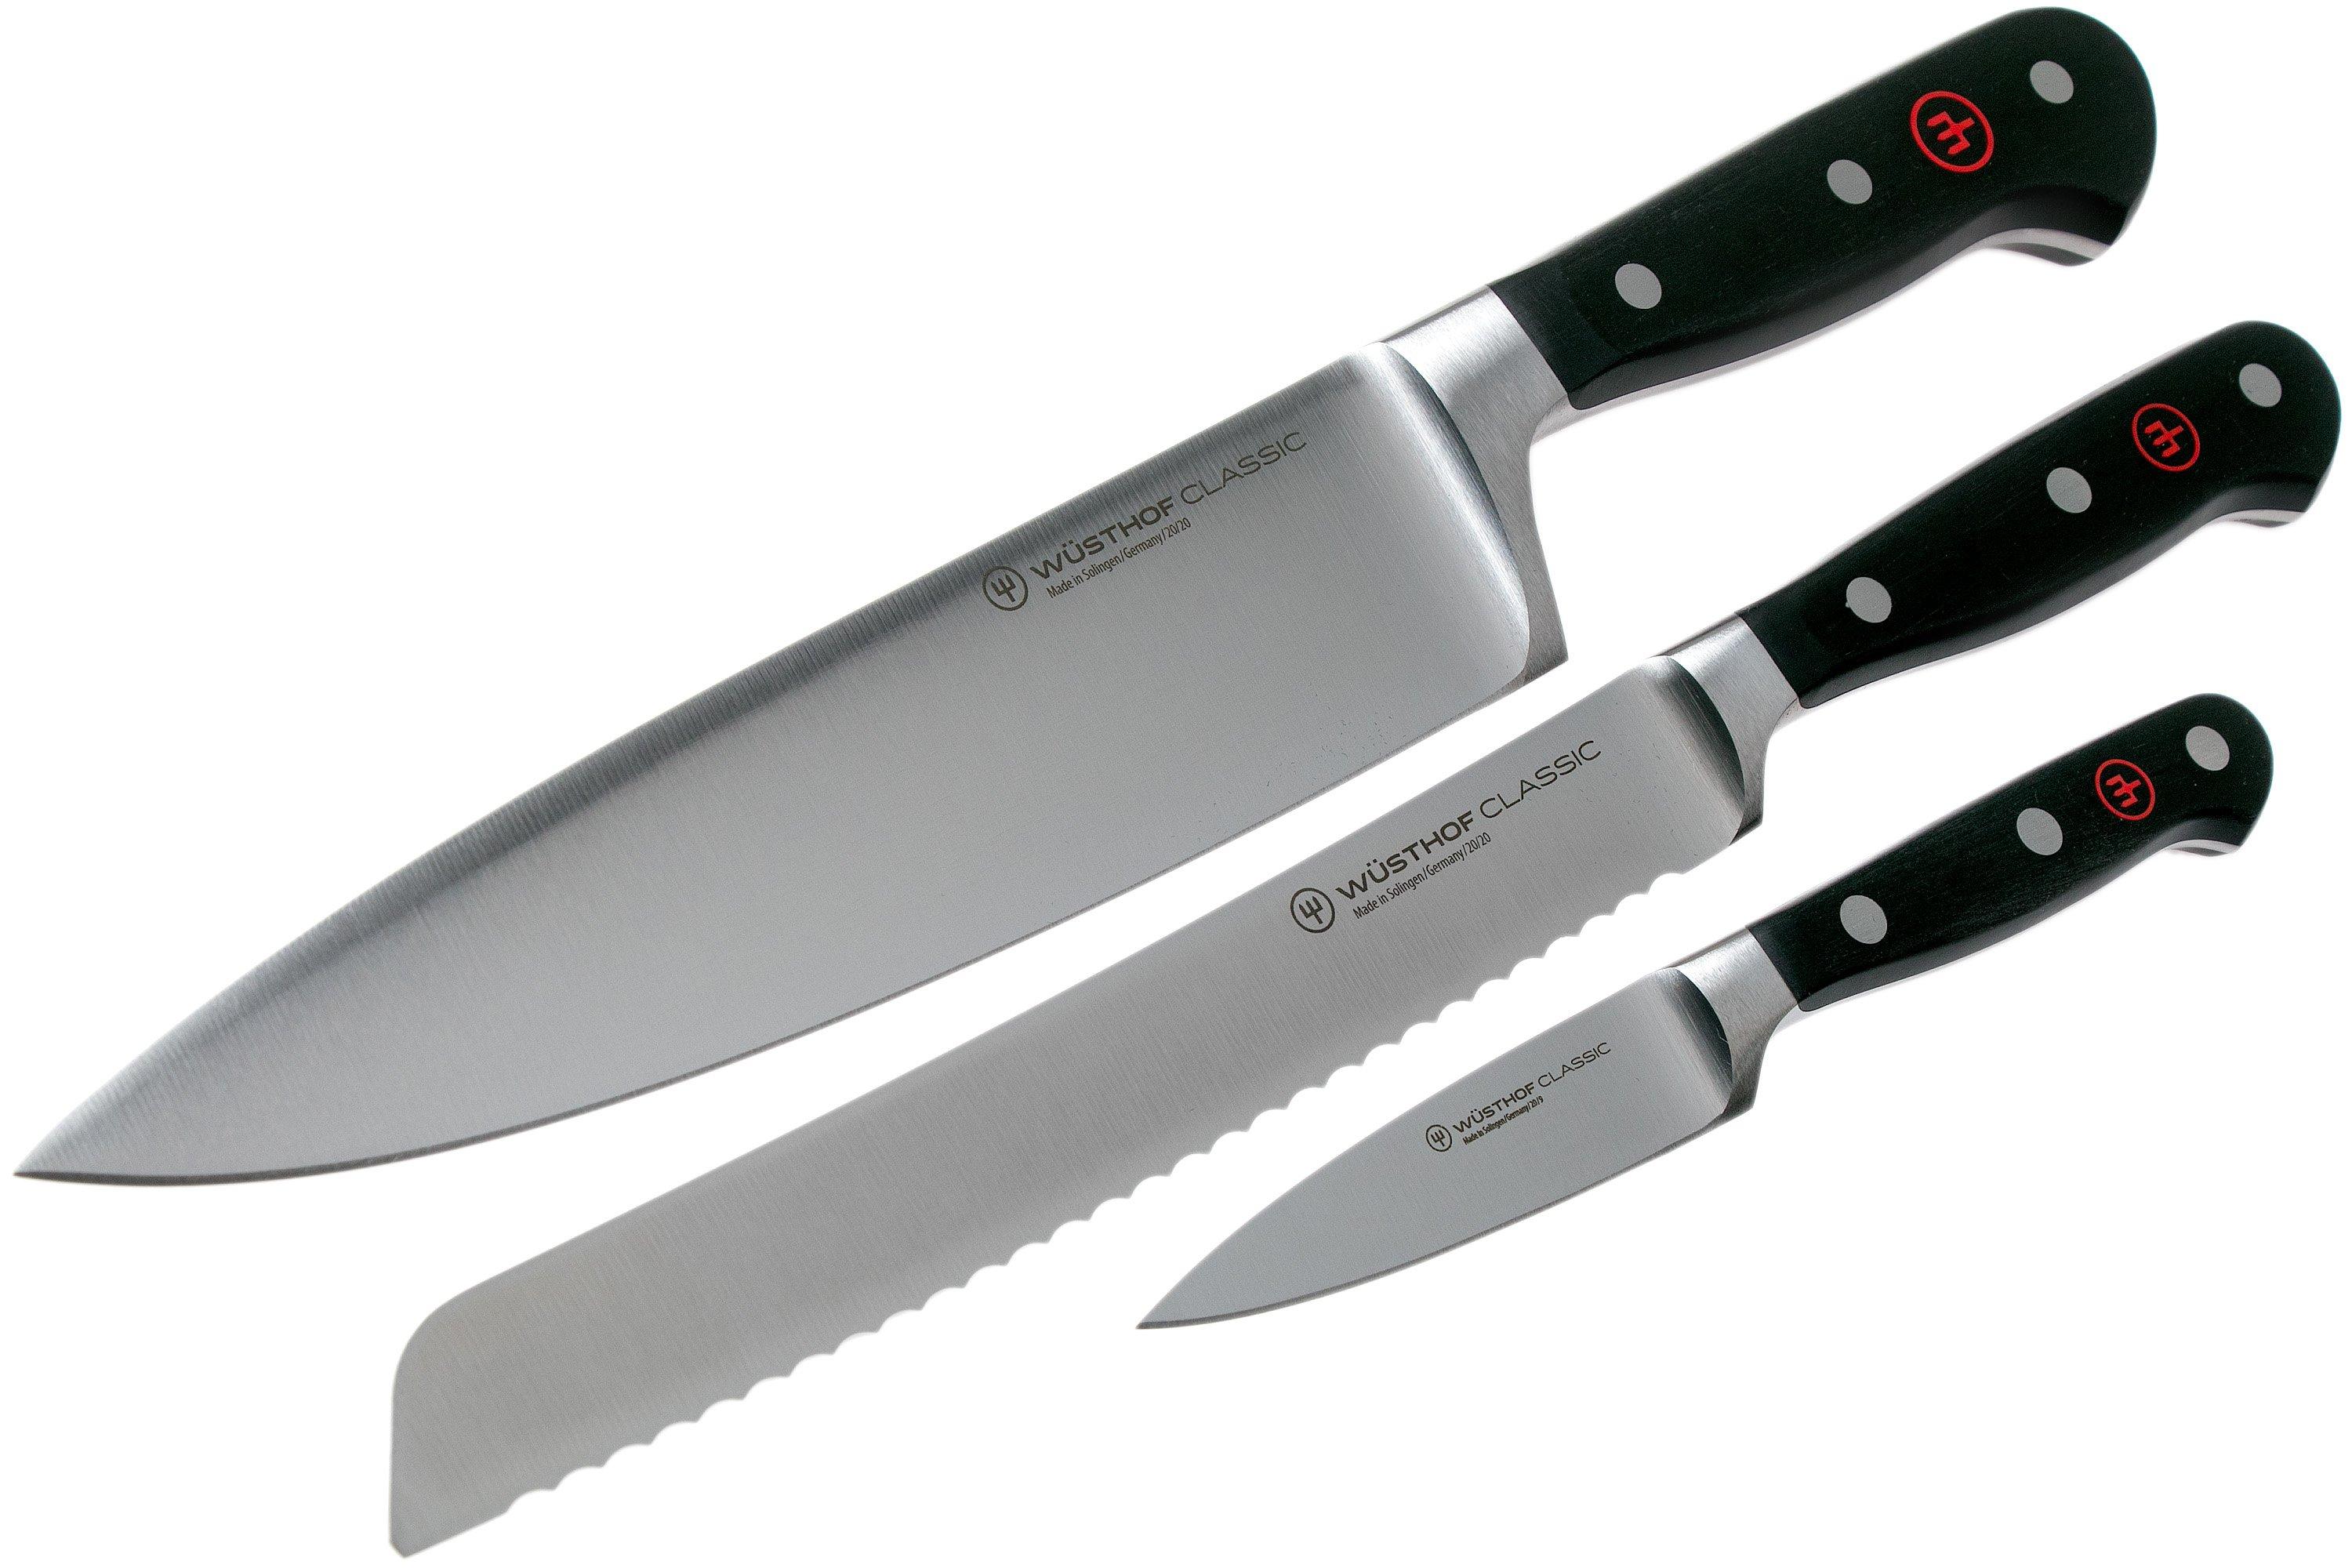 W 252 sthof Classic 3 piece knife set Black Friday Deal 1300160302 Advantageously shopping at 